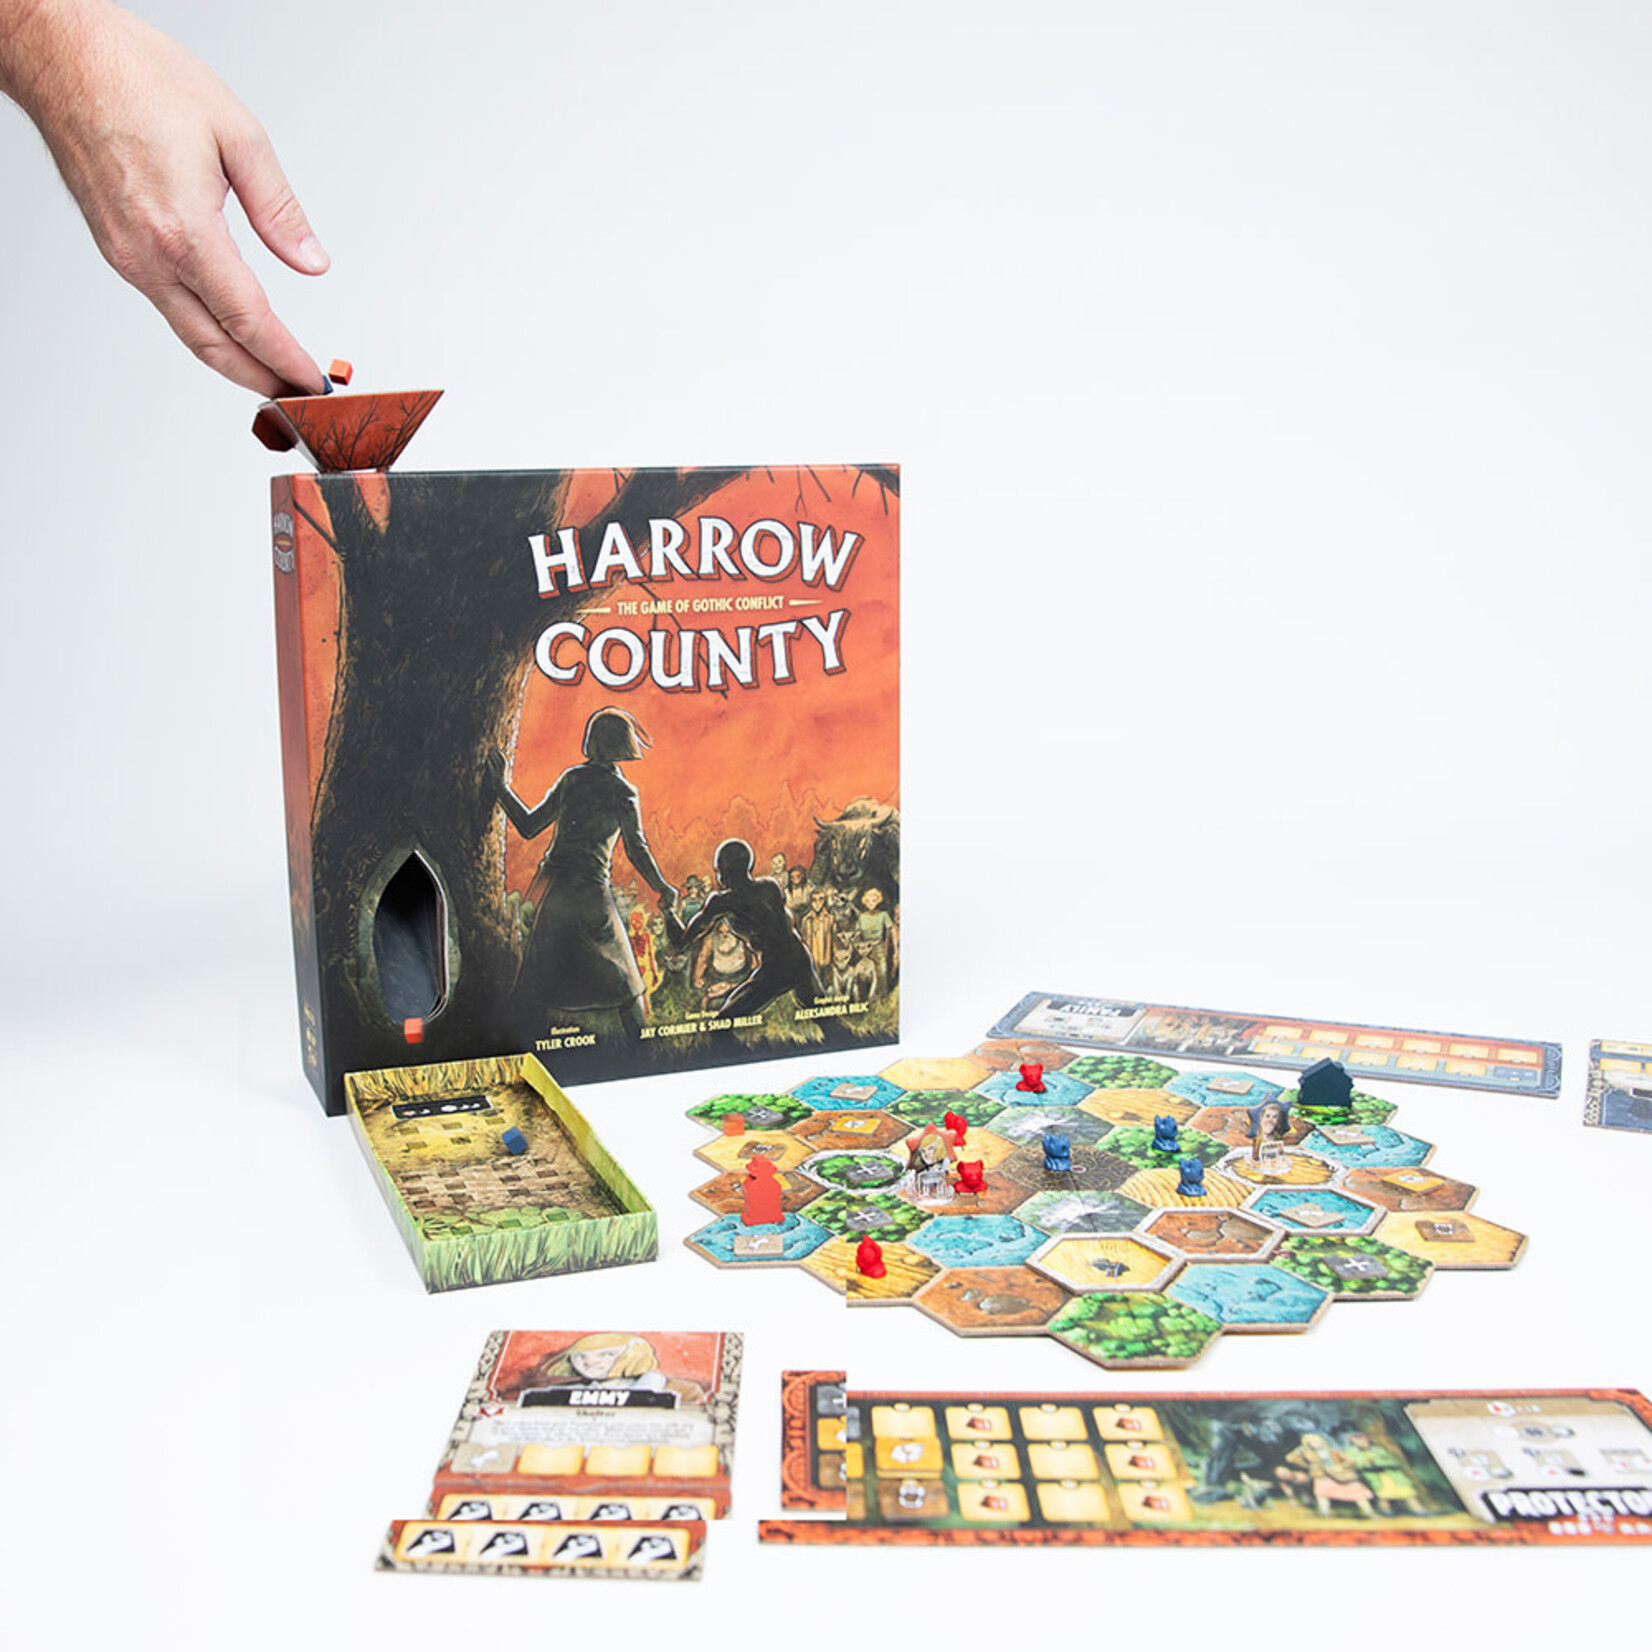 Off the Page Games Harrow County: The Game of Gothic Conflict